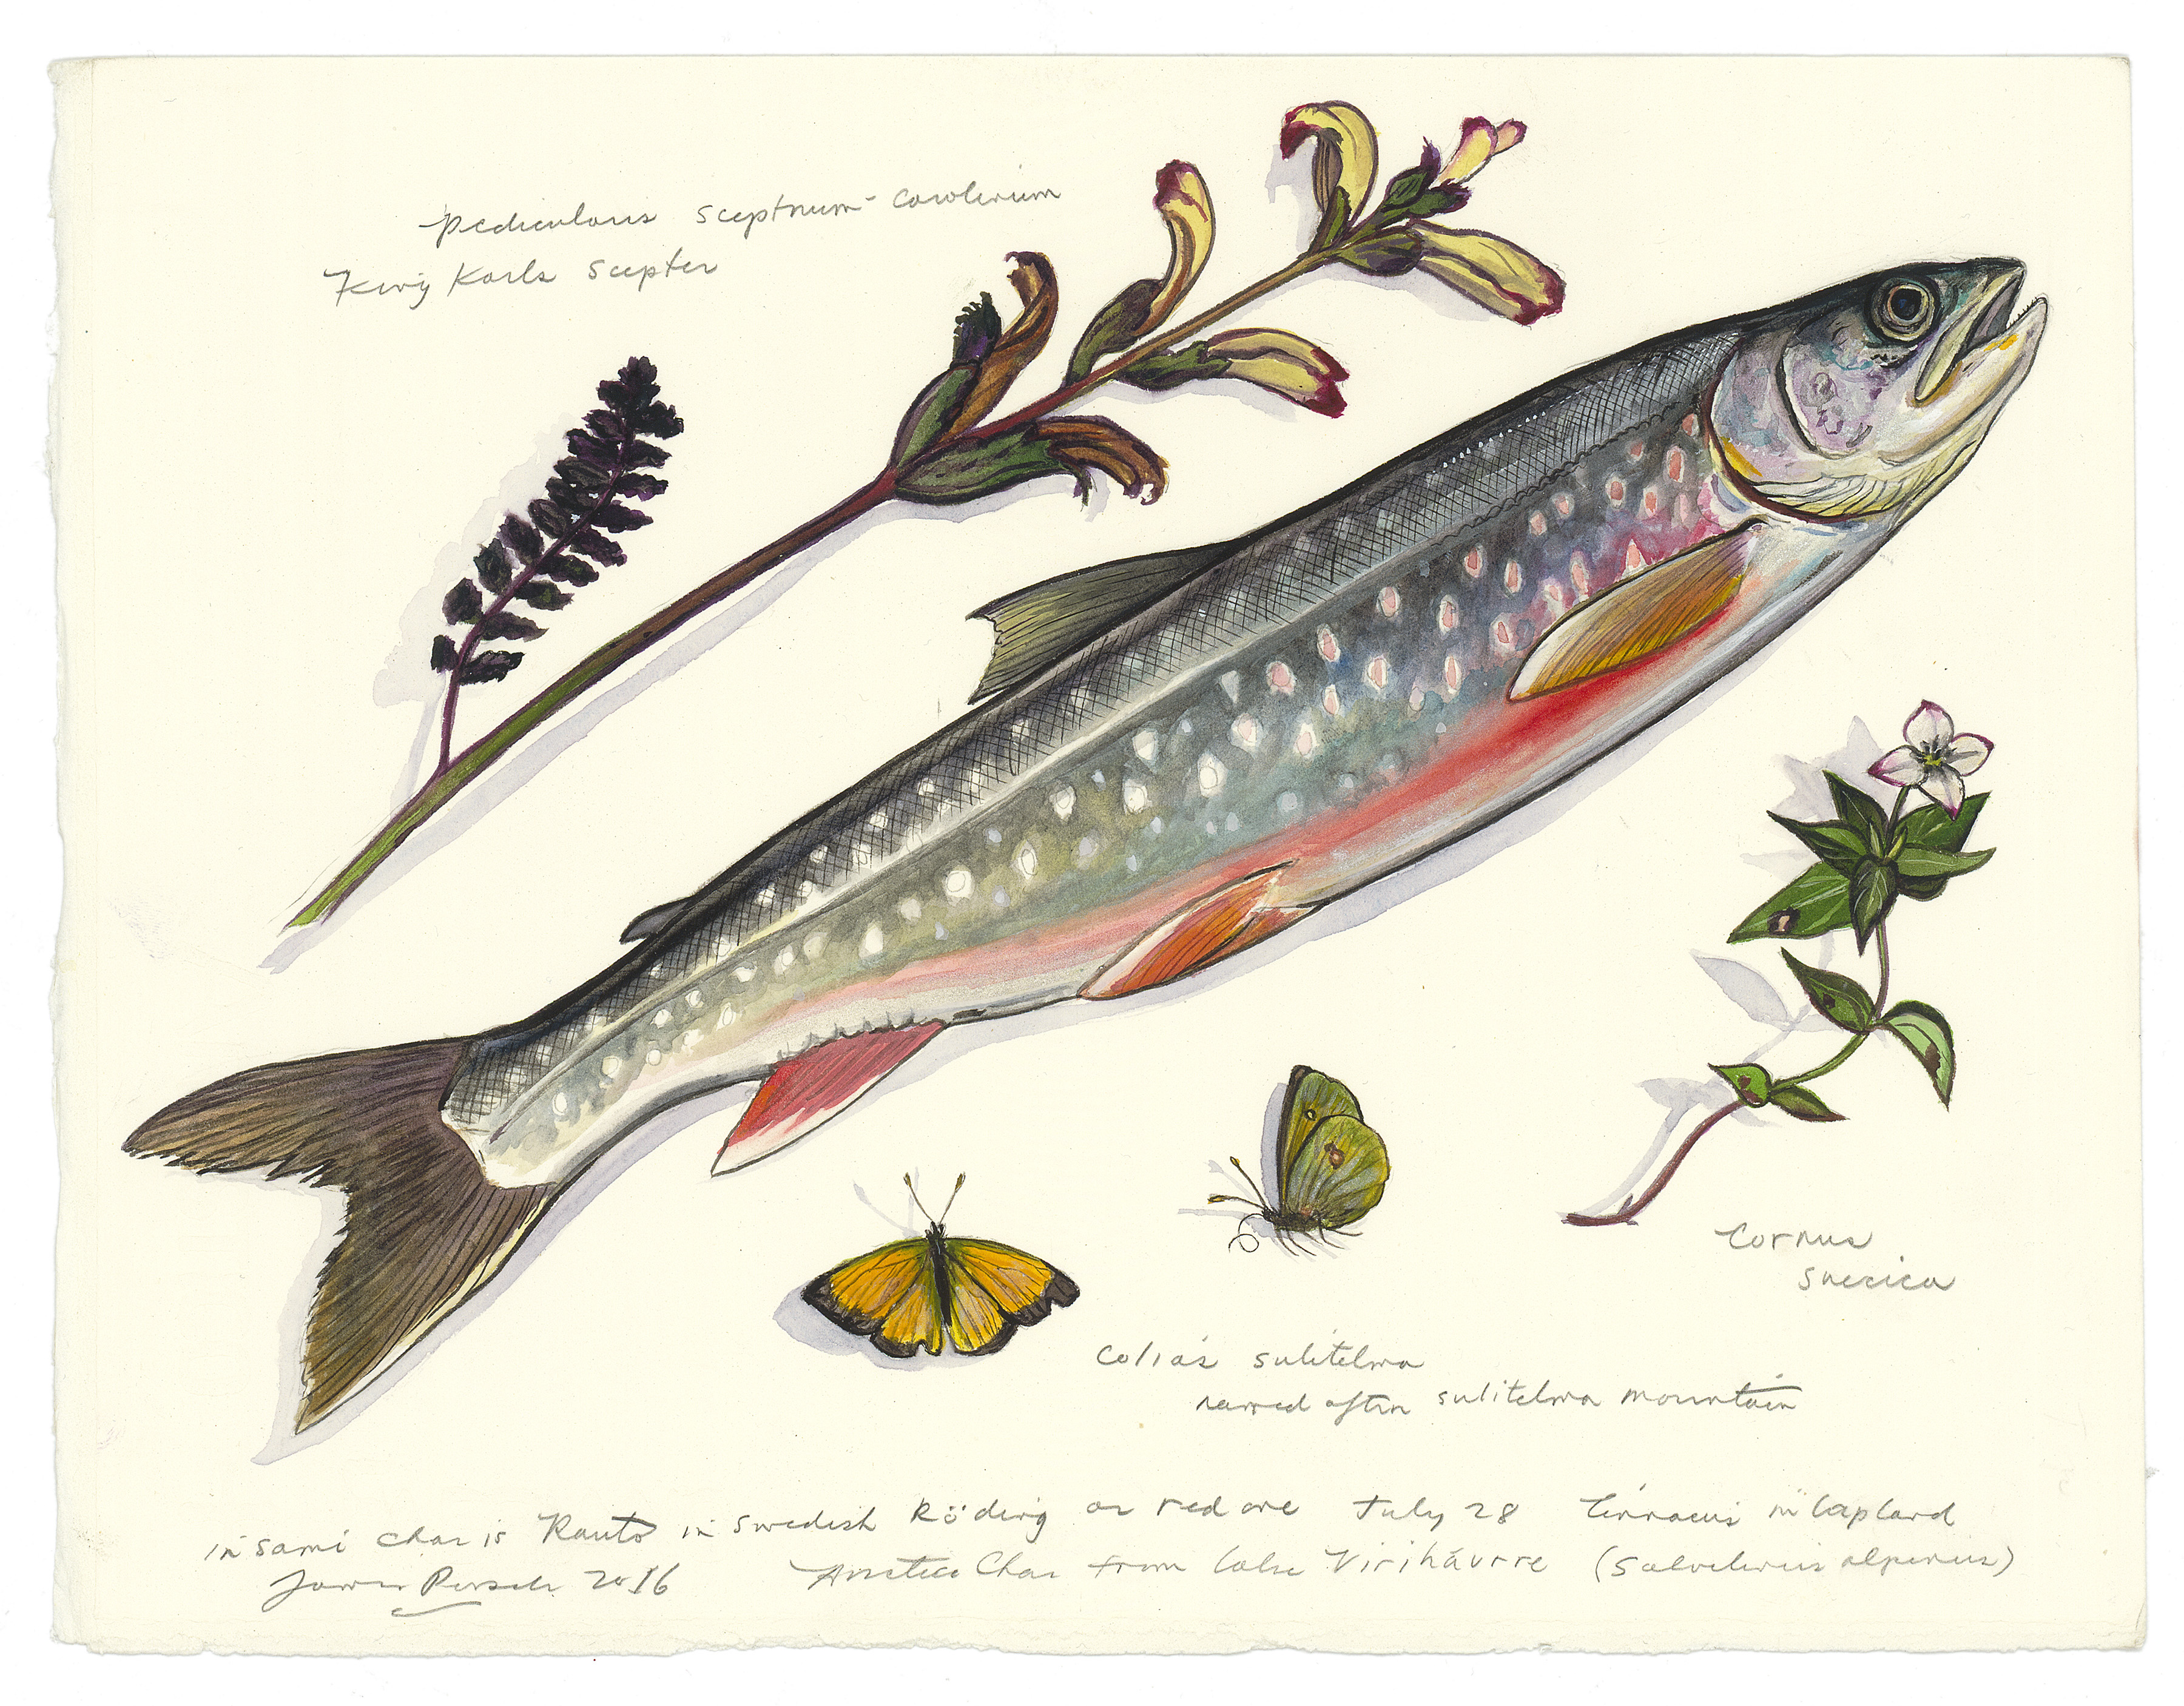 Arctic char, which Carl Linnaeus named Salmo alpinus, or alpine salmon. Artist and writer James Prosek retraced the journey through Swedish Lapland made in 1732 by Carl Linnaeus, the man who invented the two-name system (genus and species) for identifying organisms. (Painting by James Prosek, courtesy of the artist and Schwartz-Wajahat, New York via The New York Times)